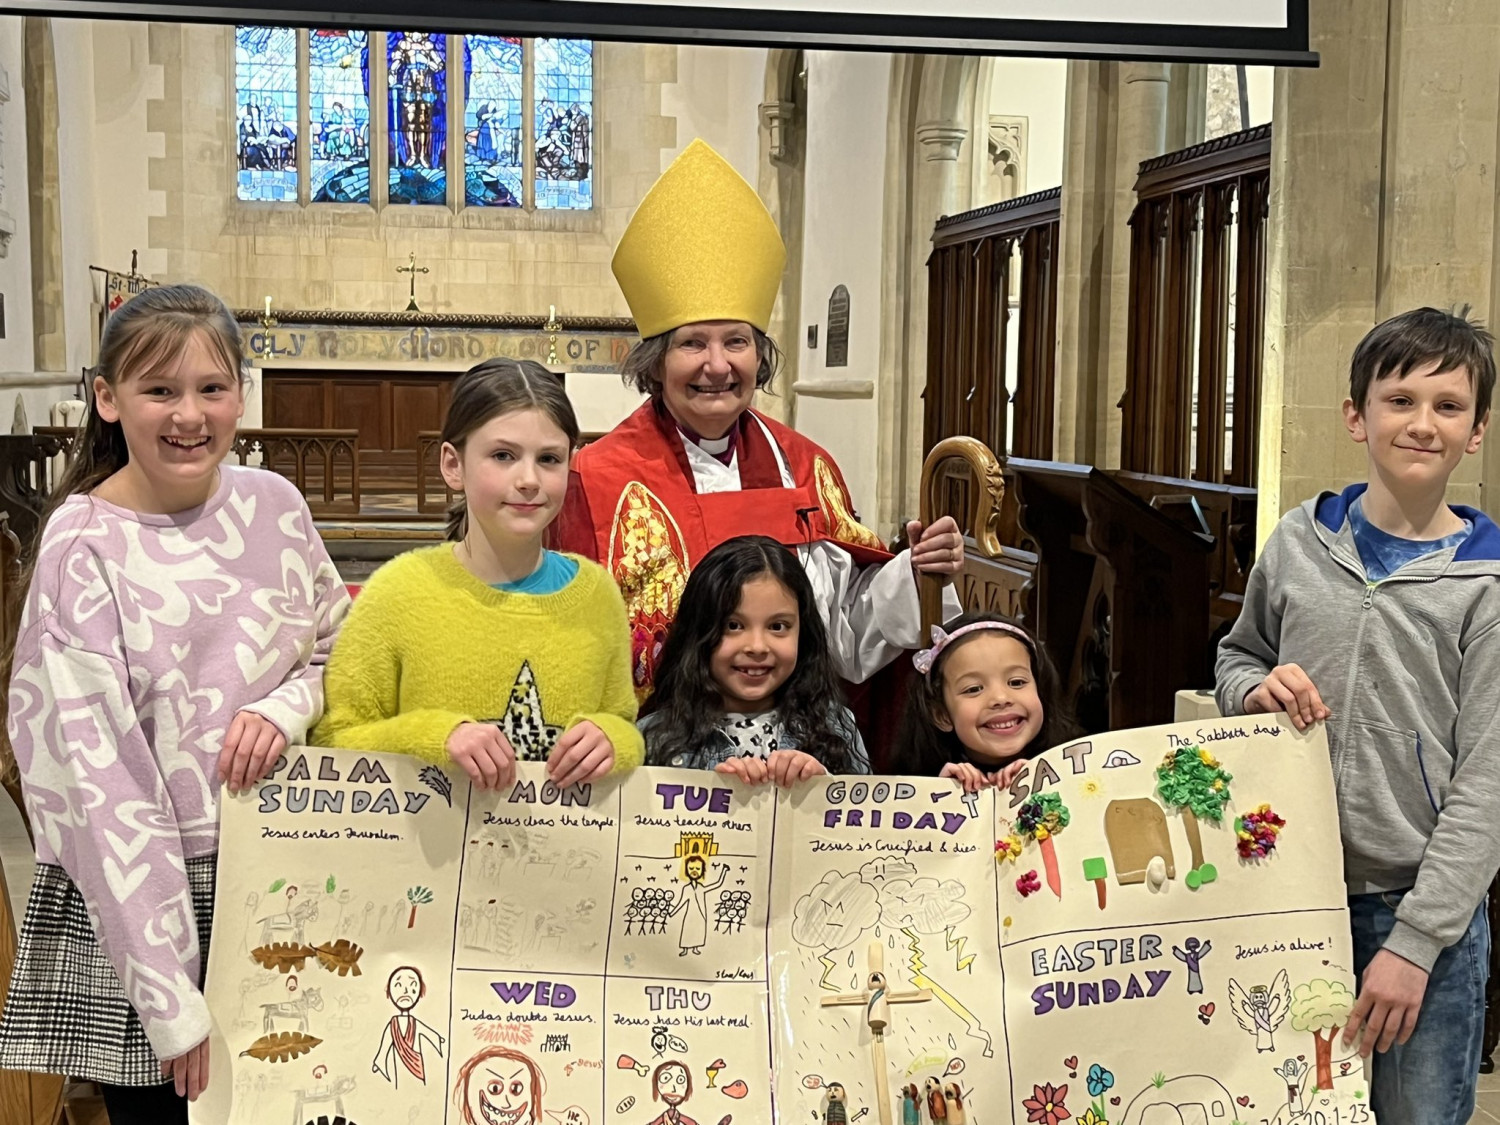 Photo of Bishop Viv standing behind 5 children of differing ages who are holding up a large poster with comic style art of the Easter calendar.